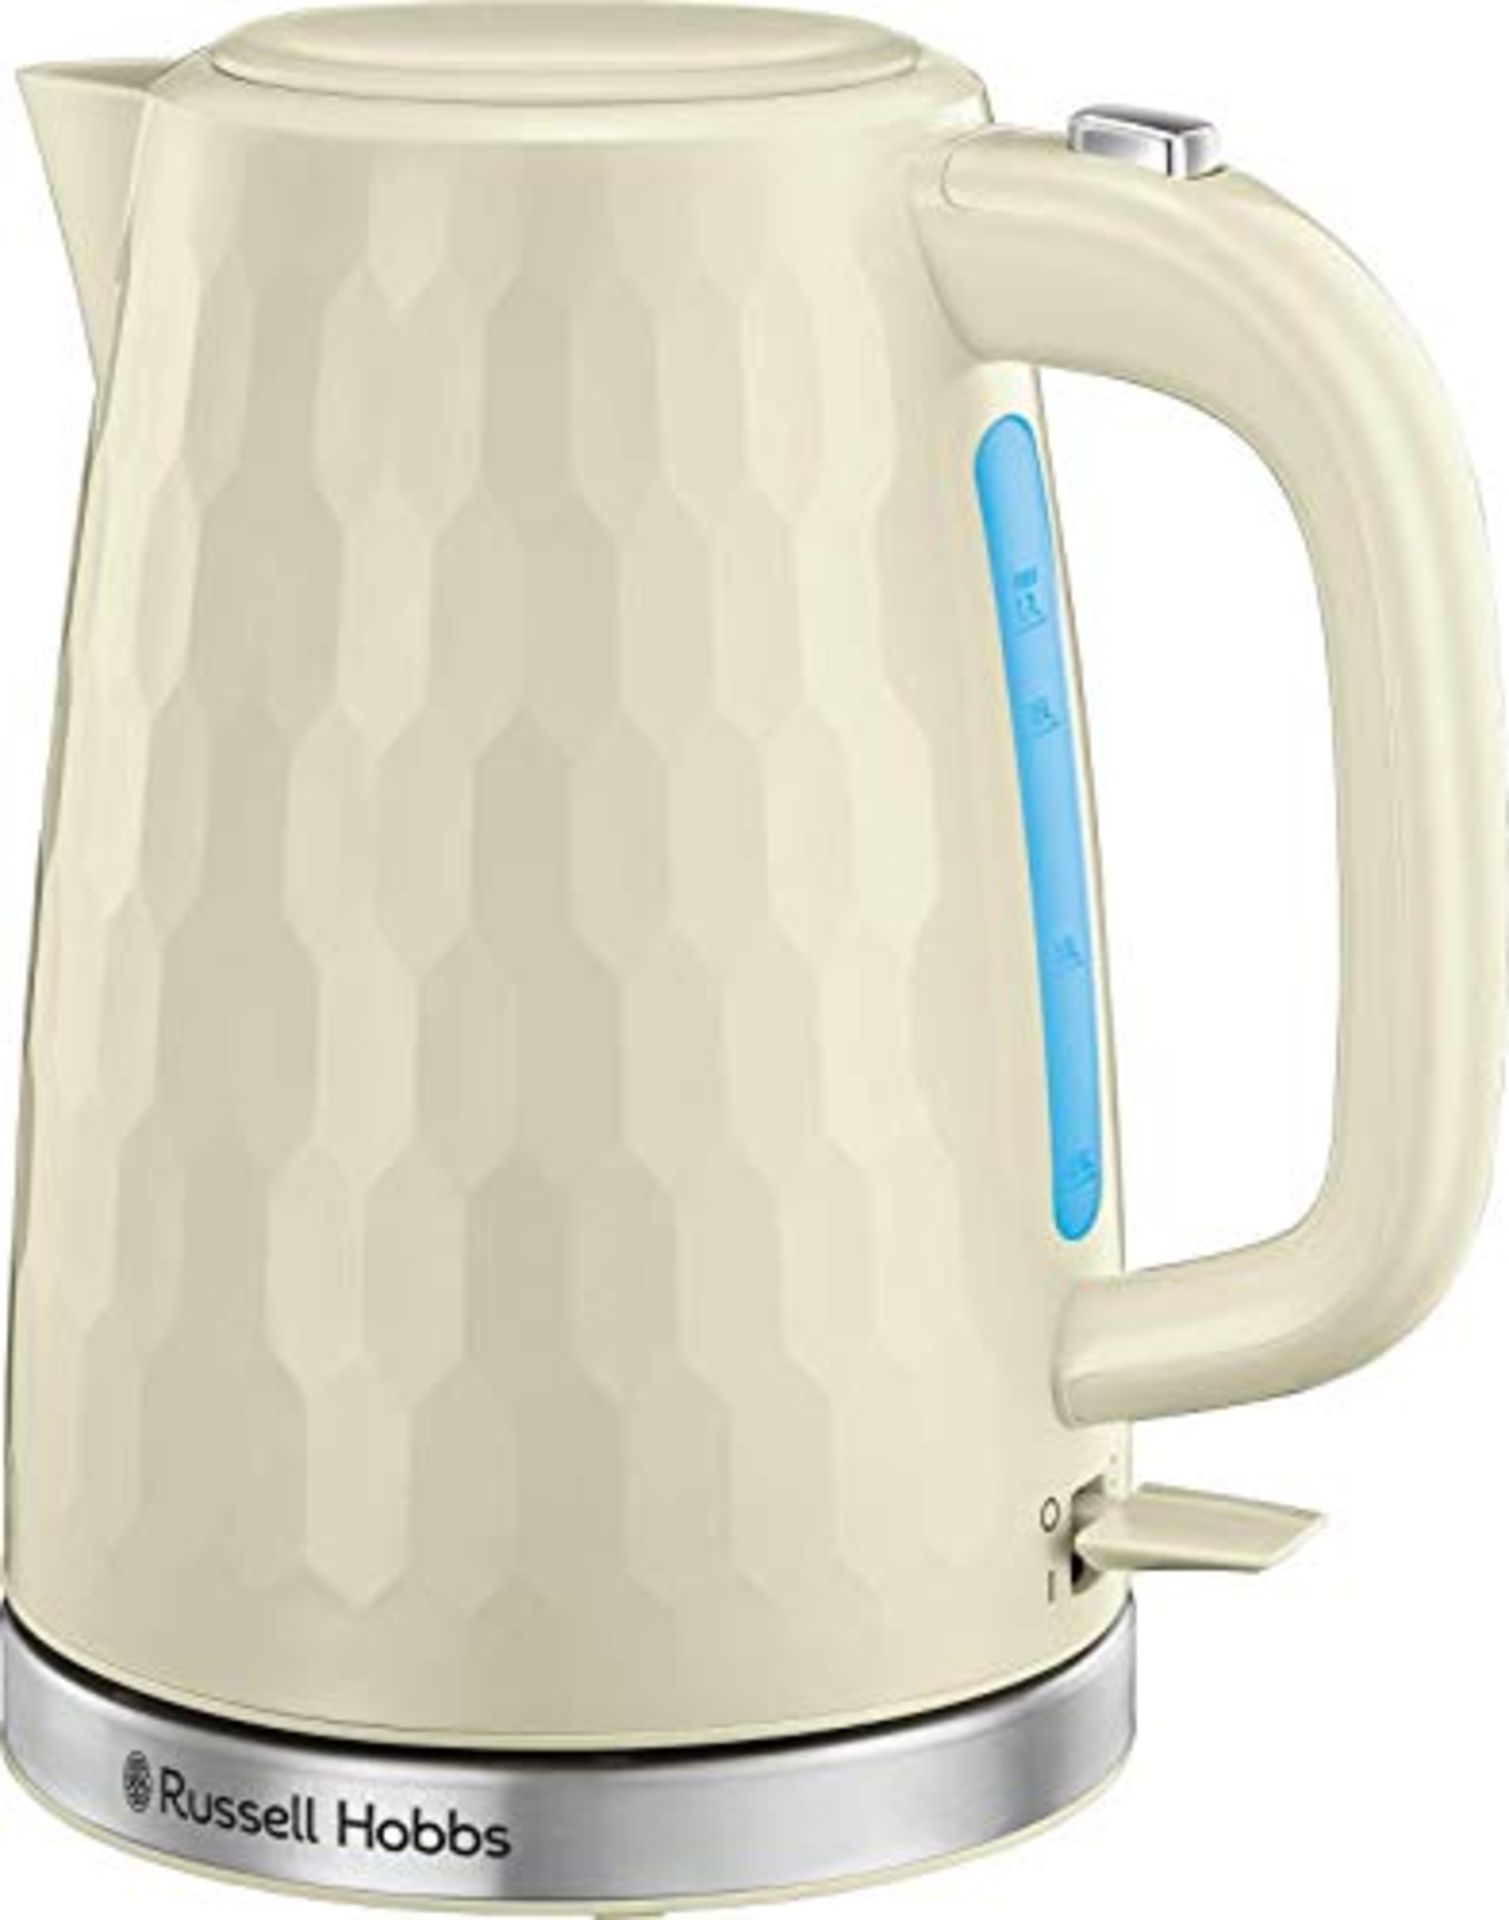 Russell Hobbs 26052 Cordless Electric Kettle - Contemporary Honeycomb Design with Fast